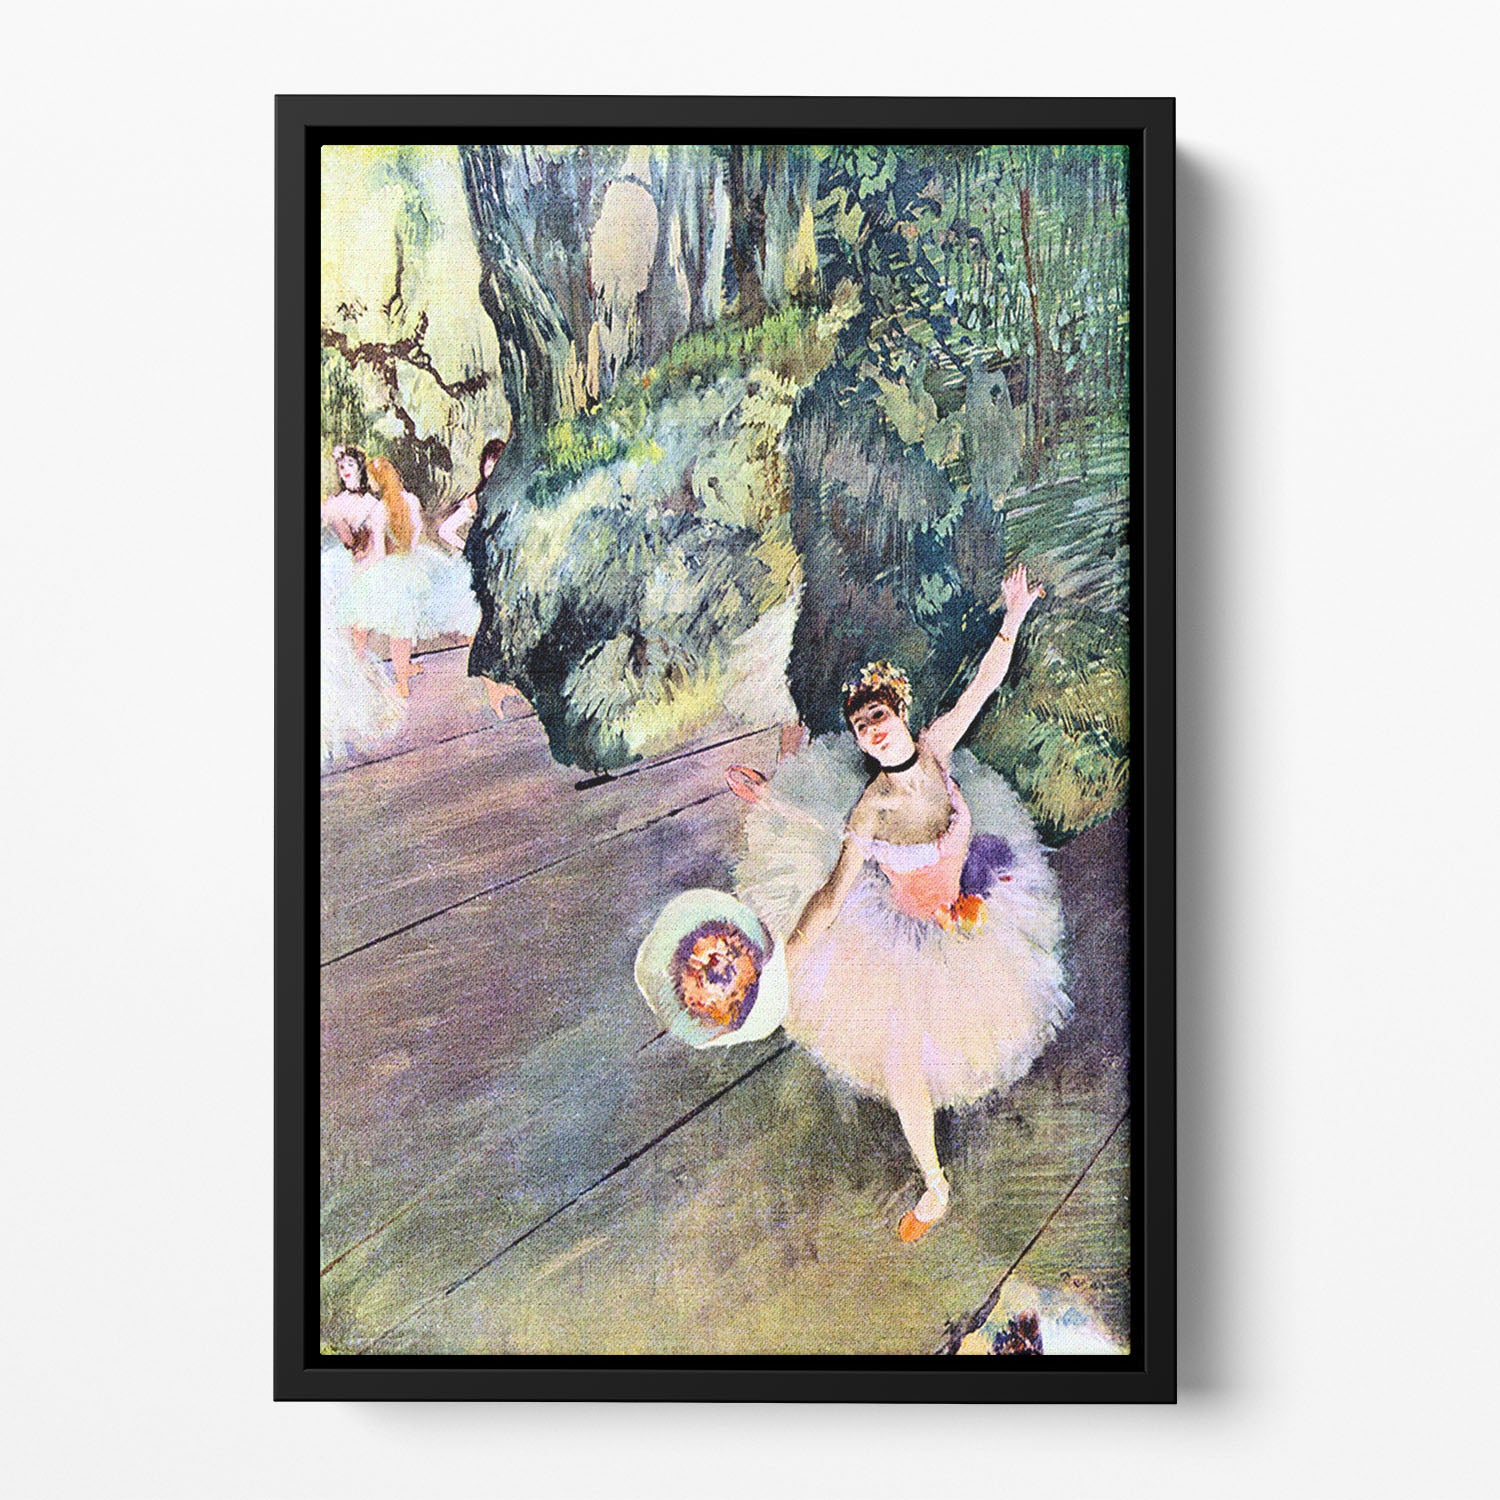 Dancer with a bouquet of flowers The Star of the ballet by Degas Floating Framed Canvas